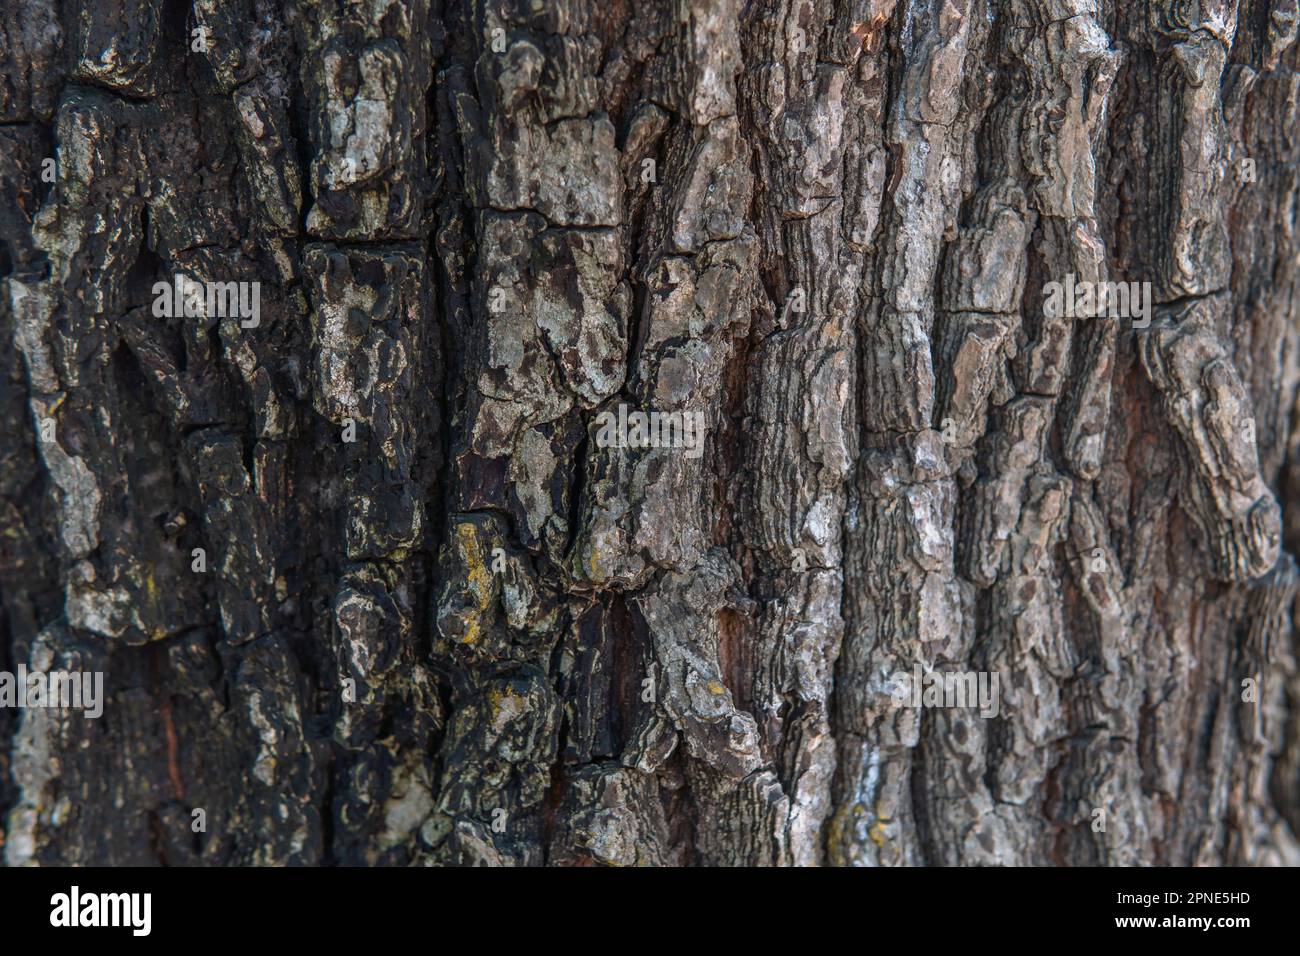 Bark close-up with unique patterns dark and light in color Stock Photo